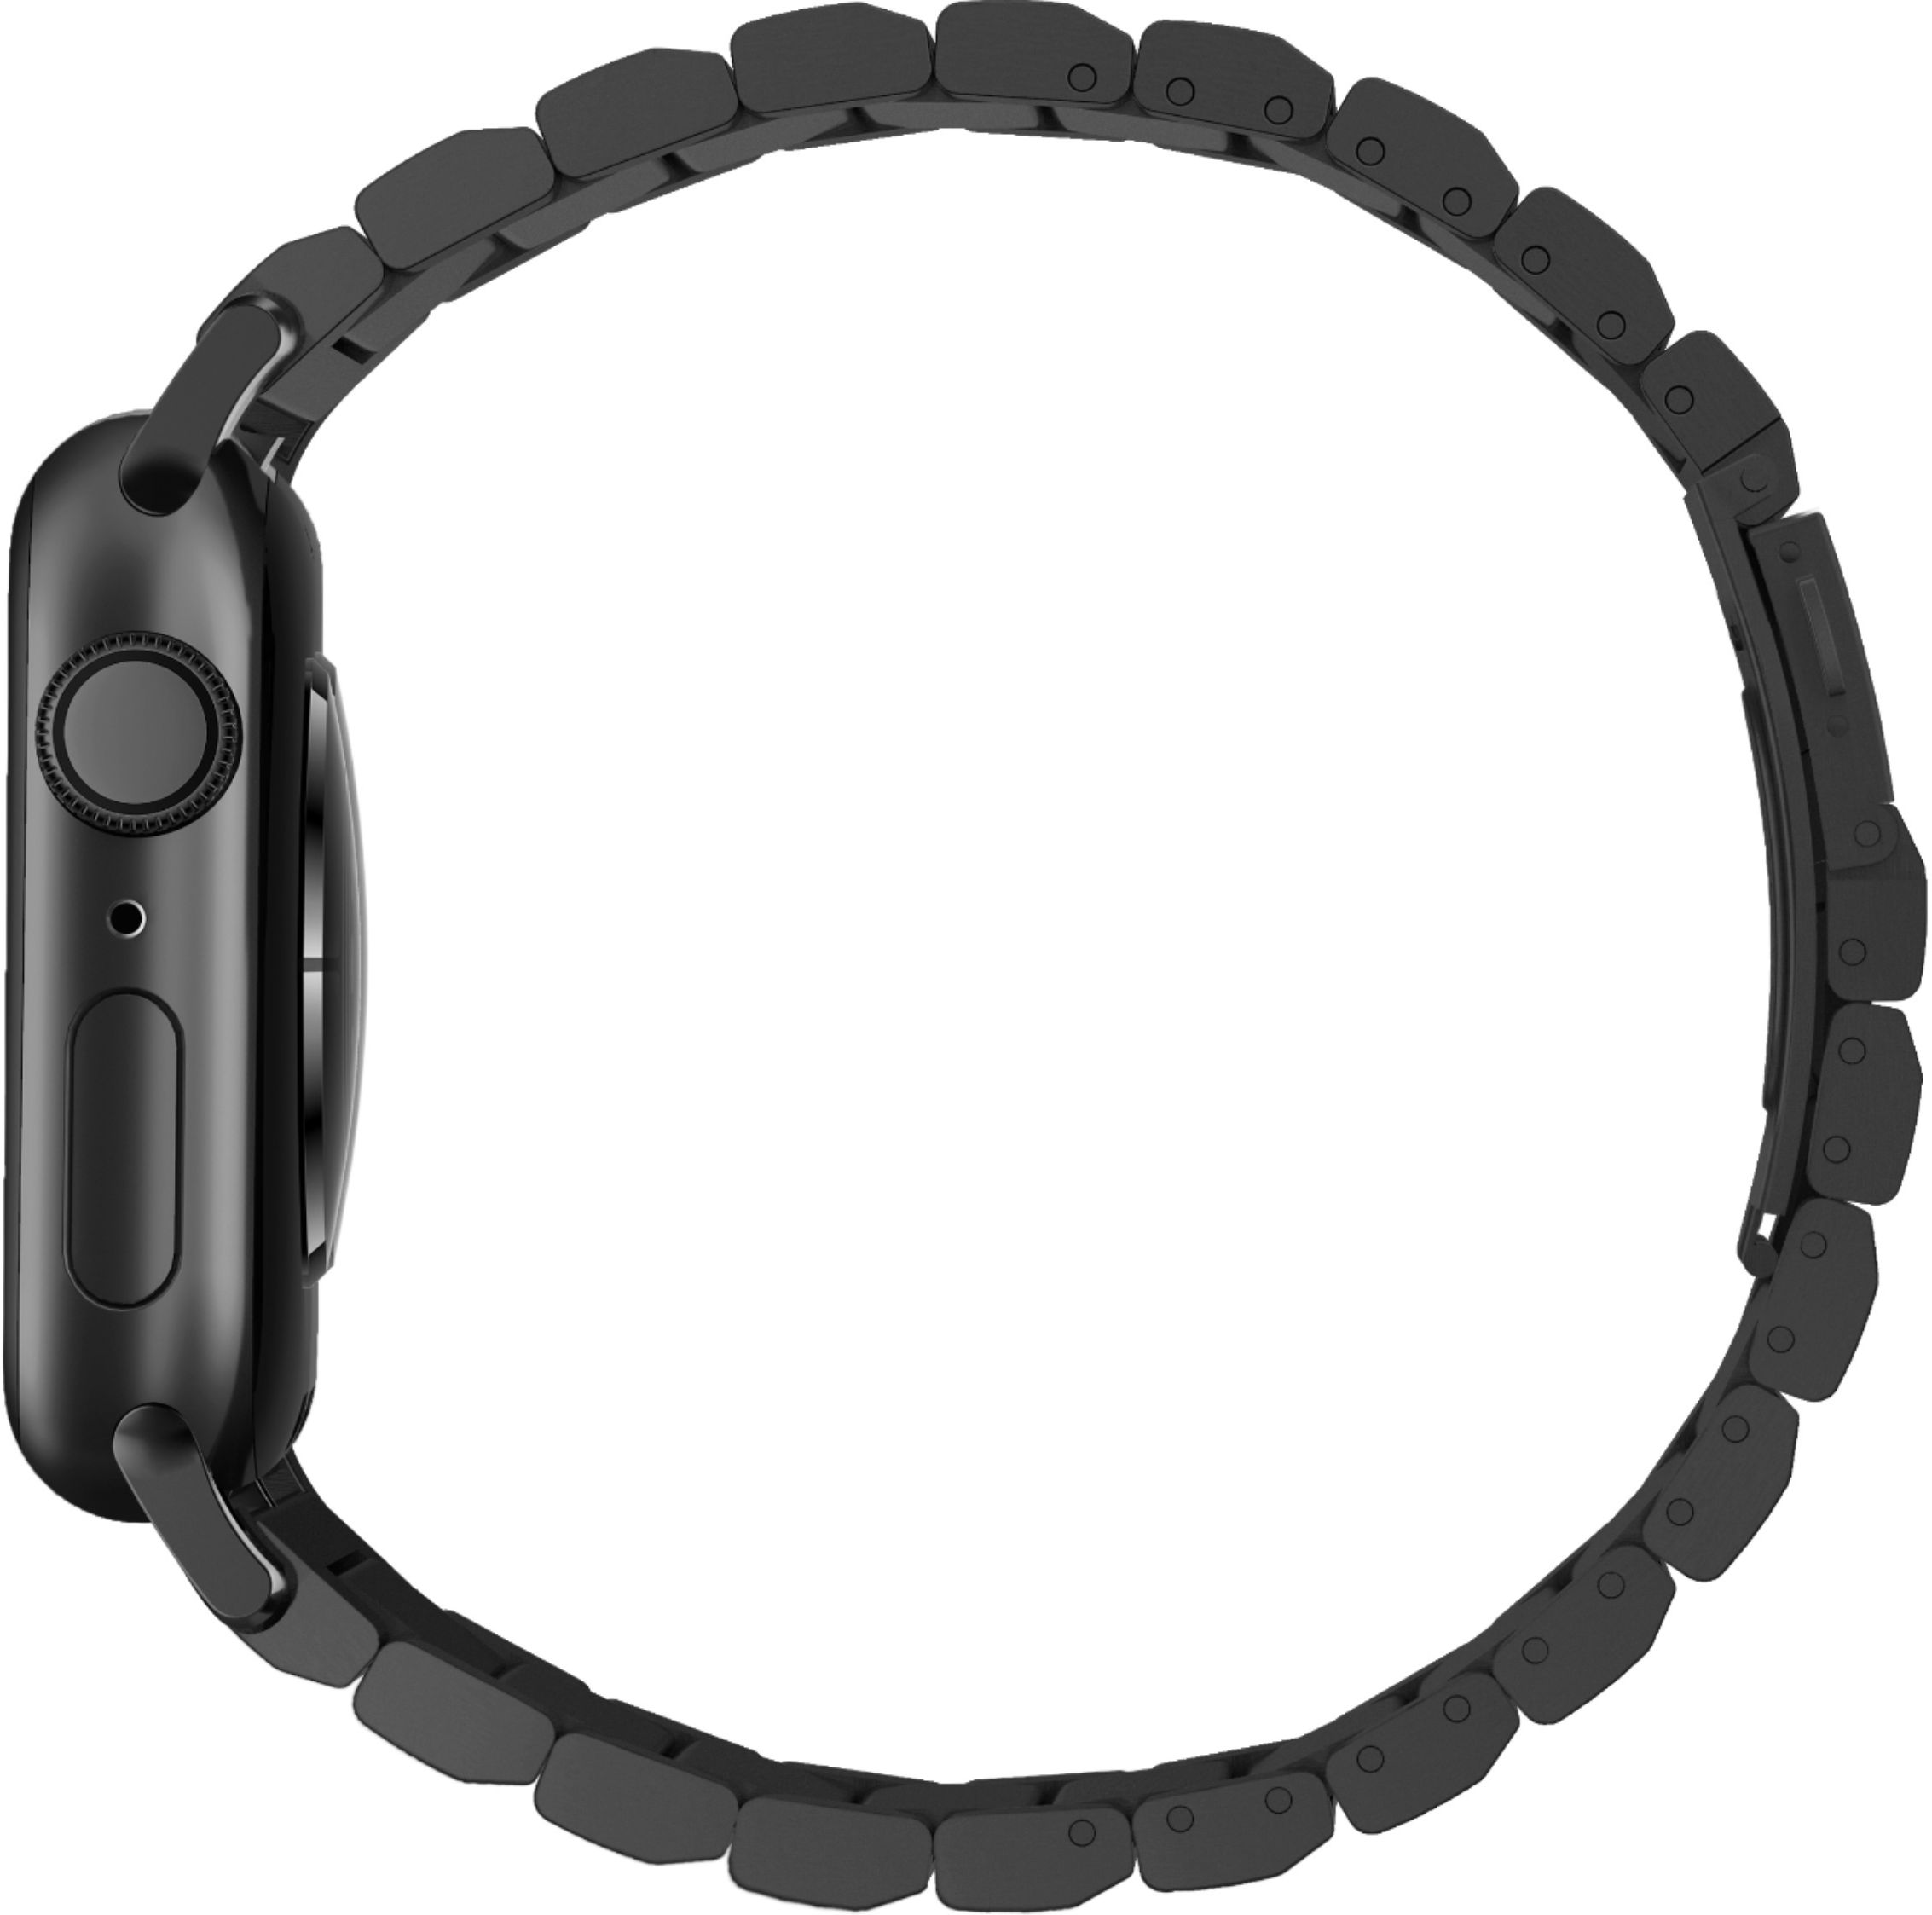 and Watch® 42mm Band Watch for Best Metal NM1A4HB000 - Nomad Buy 44mm Black Apple